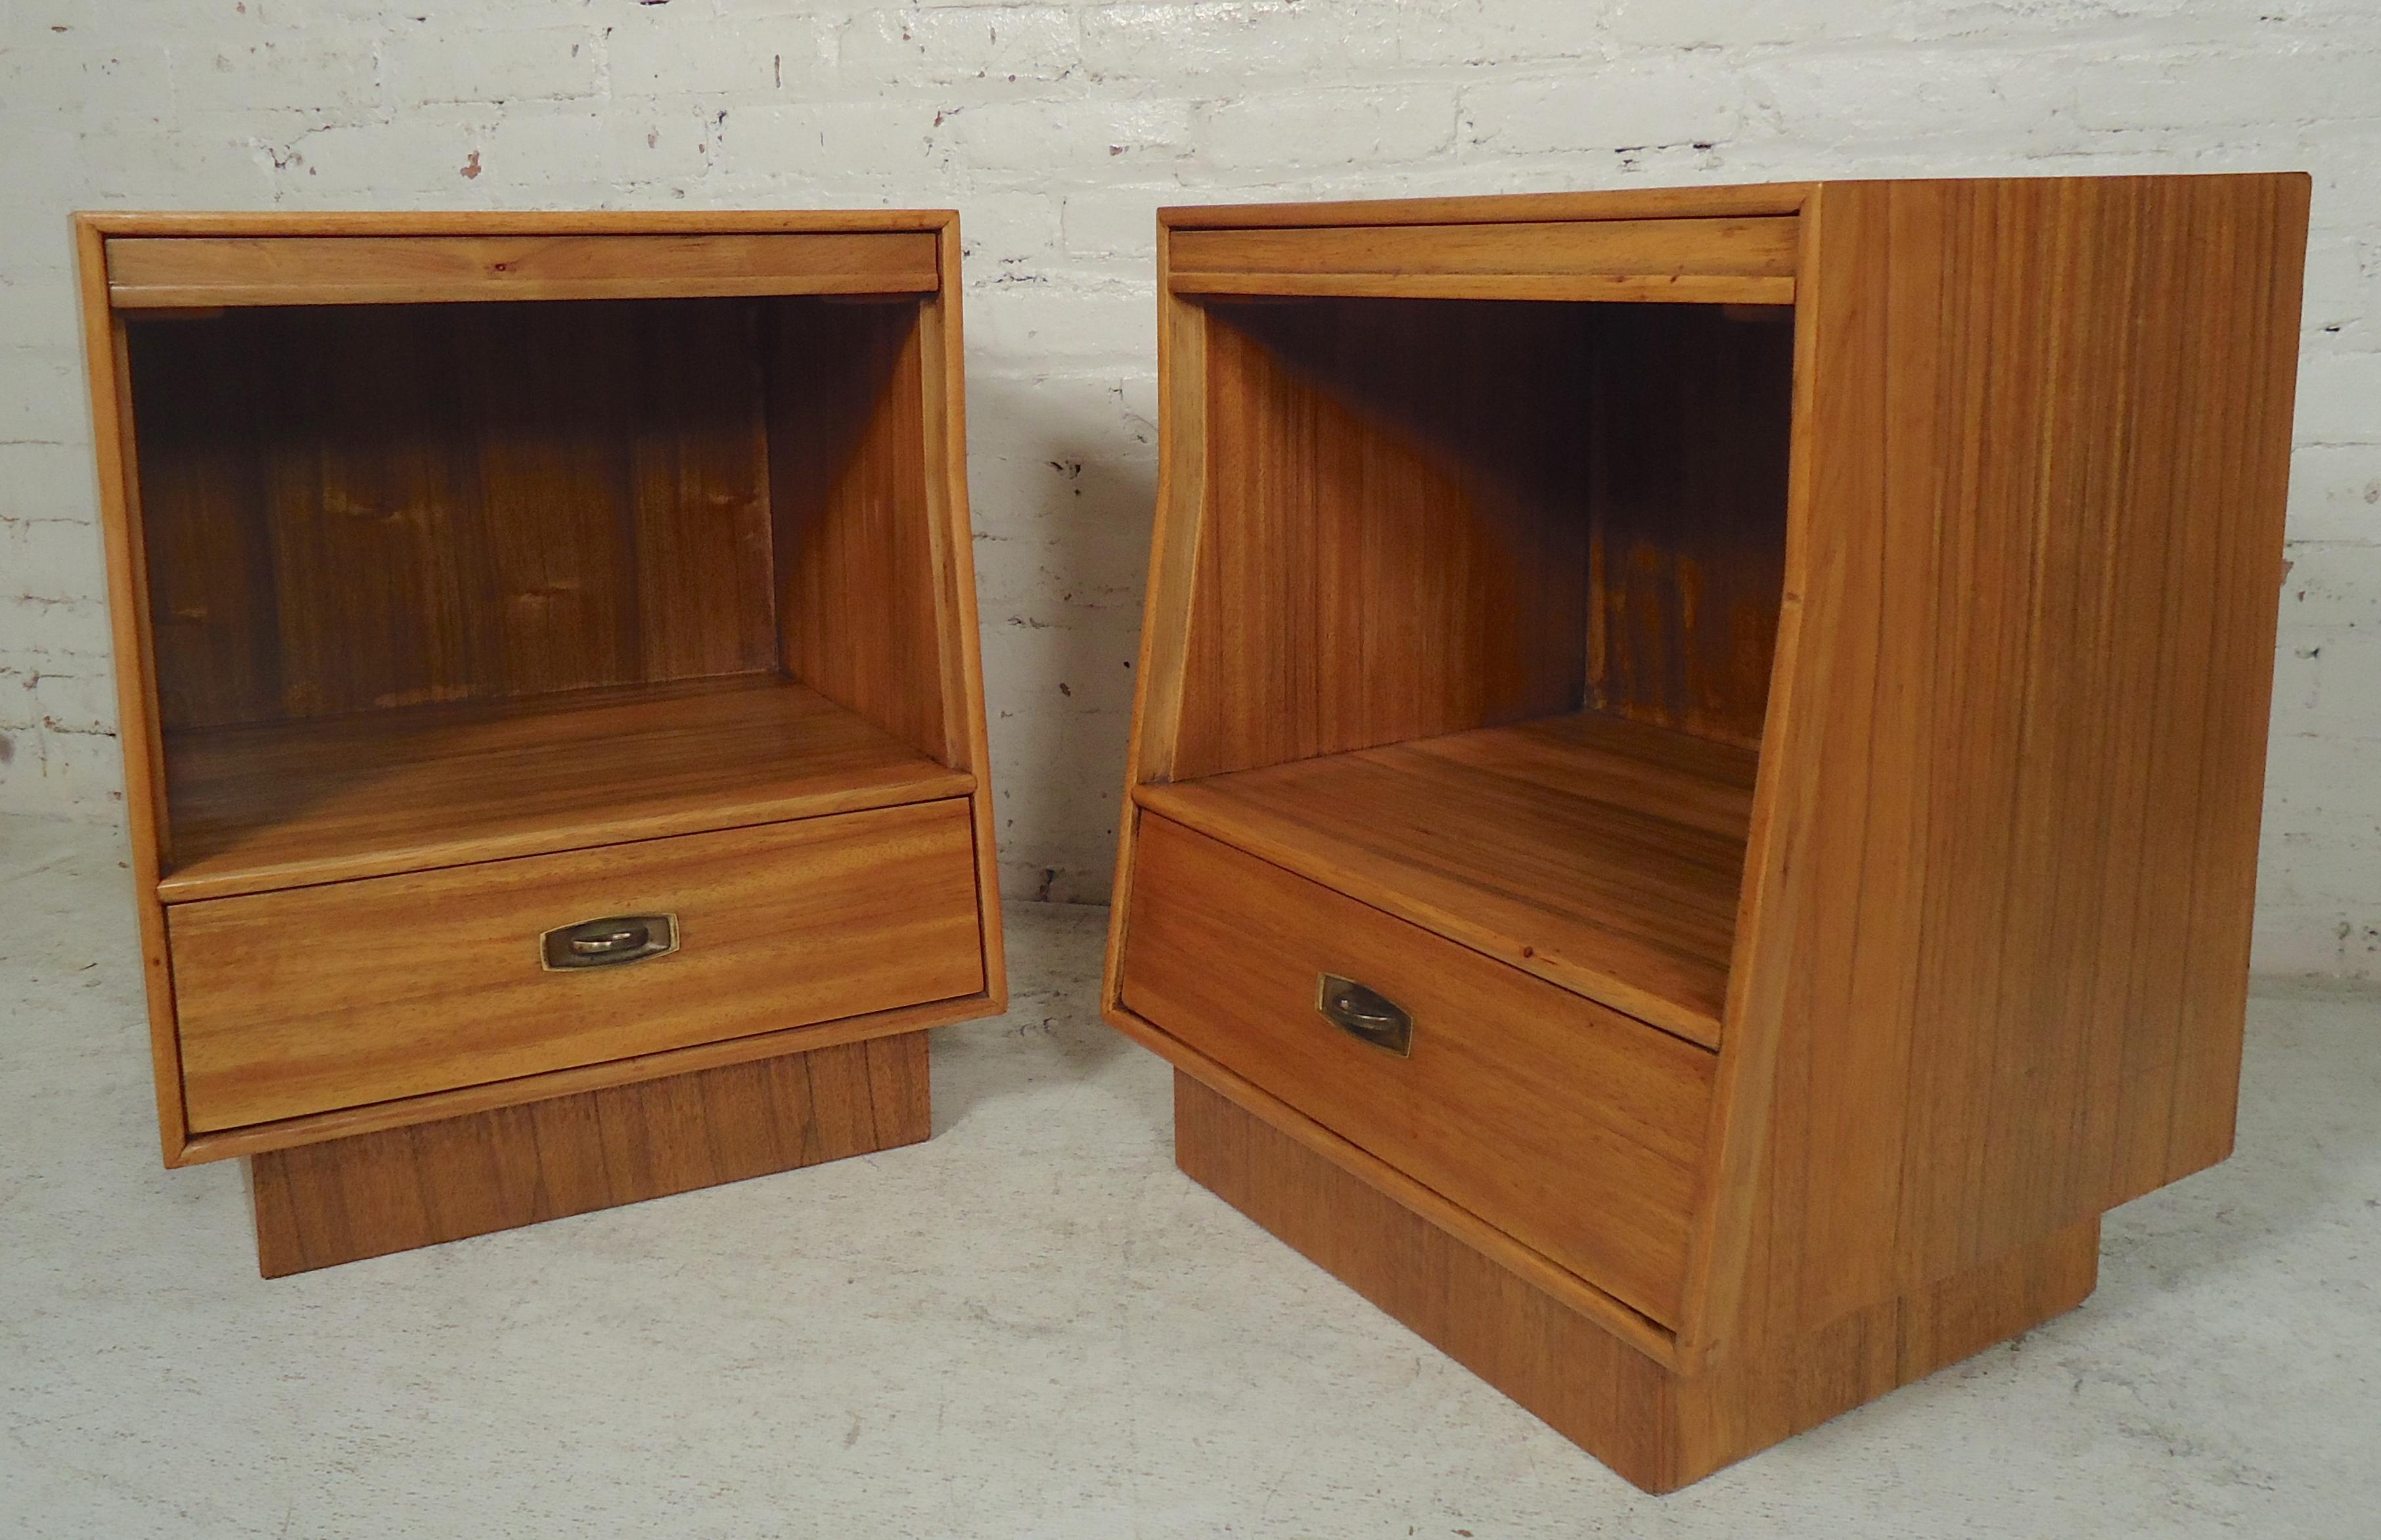 Pair of refinished end tables by Drexel with pull out shelf, open storage and bottom drawer.
(Please confirm item location - NY or NJ - with dealer).
 